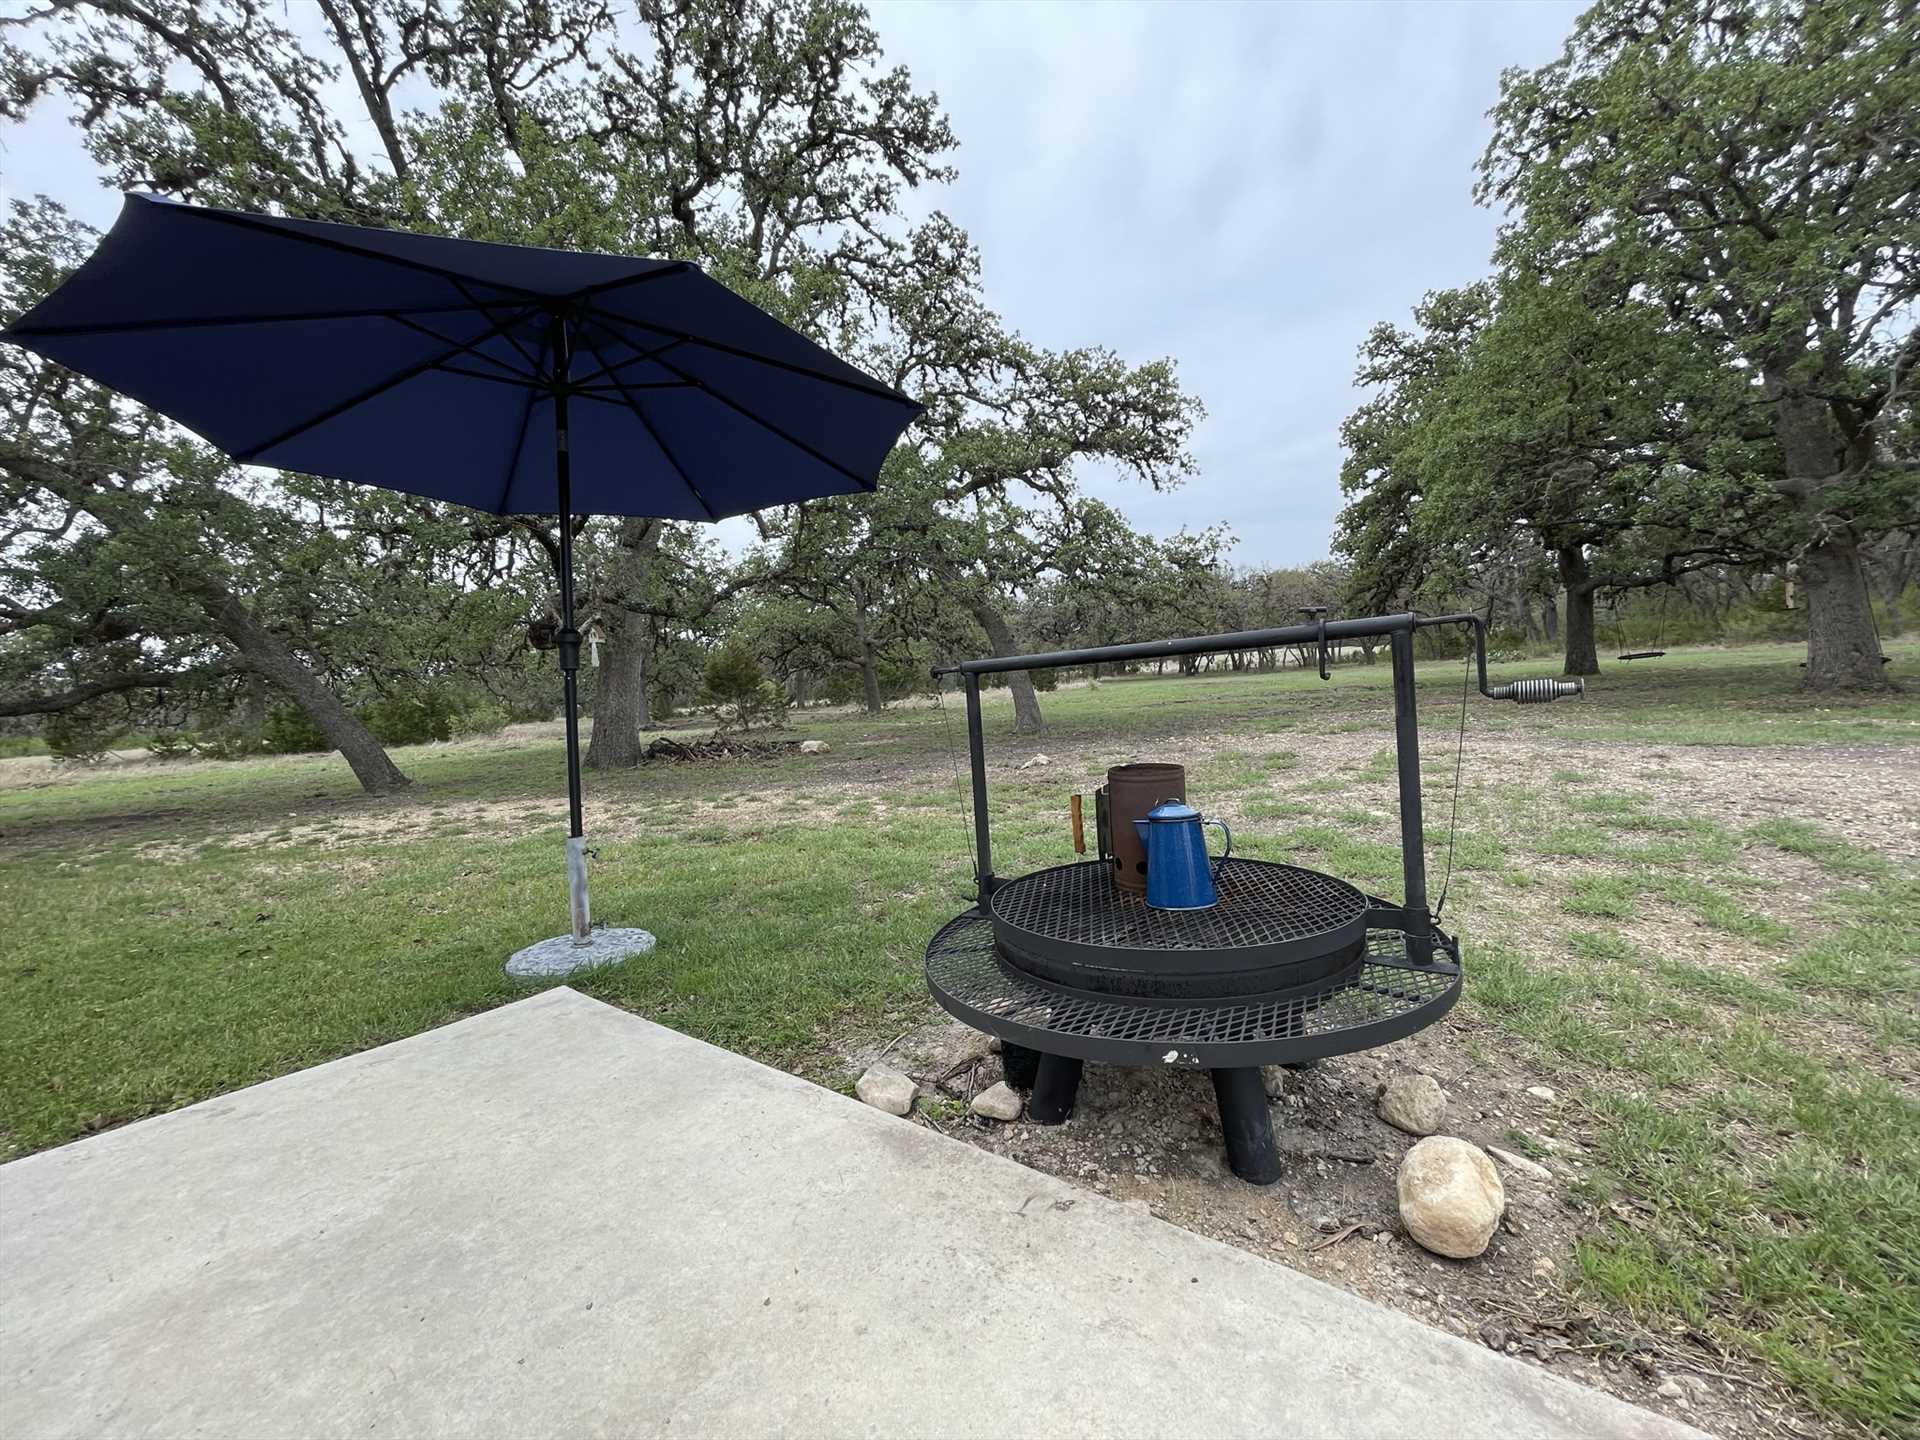                                                 Bubble up a pot of frontier-style coffee, or toast some s'mores, on the convenient and fun fire pit!